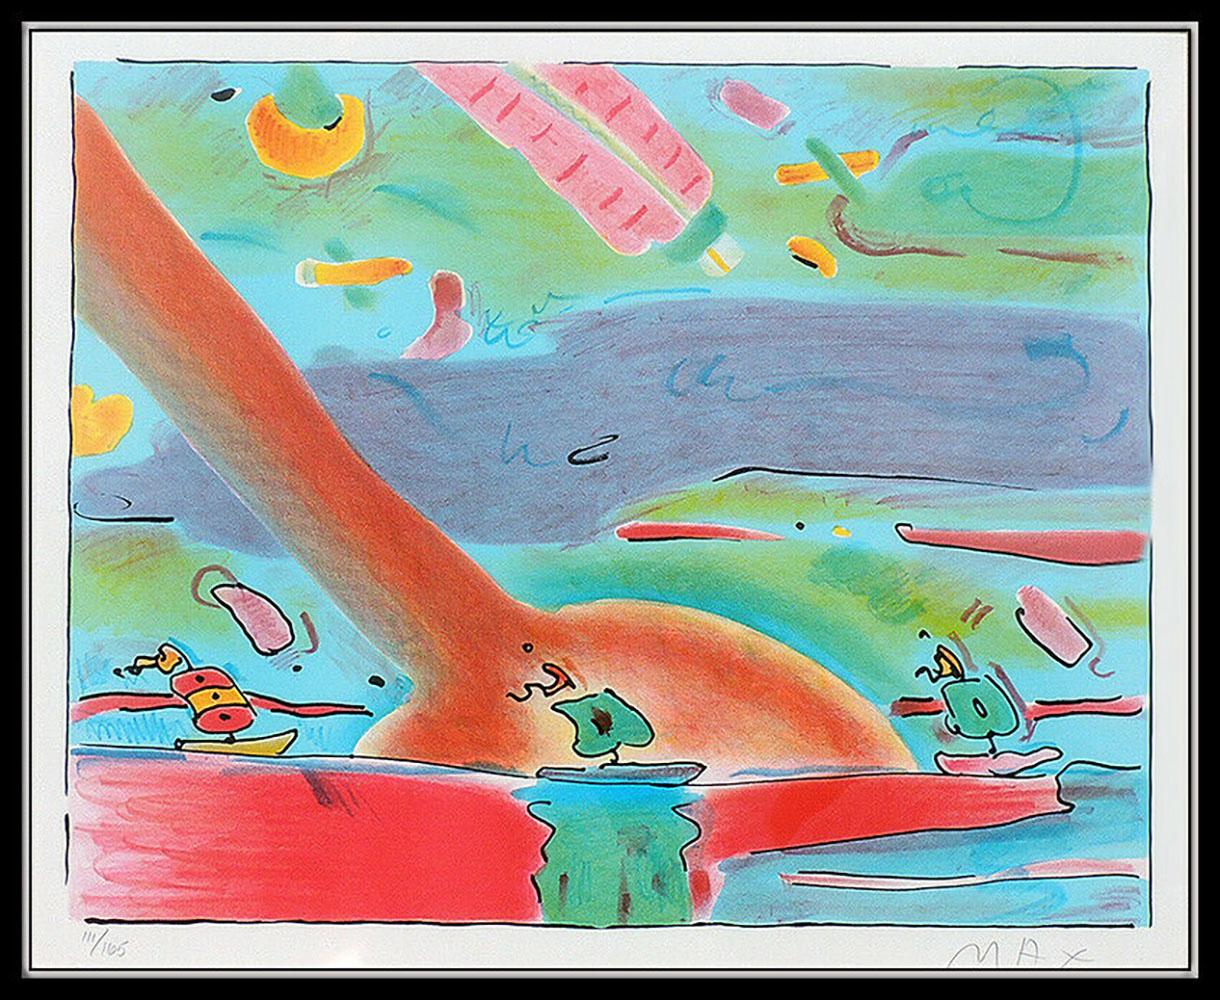 Peter Max Hand Signed and Numbered Color Lithograph, Professionally Custom Framed and listed with the Submit Best Offer option 

Accepting Offers Now:  Up for sale here we have an Extremely Rare and Authentic Lithograph by Peter Max titled,